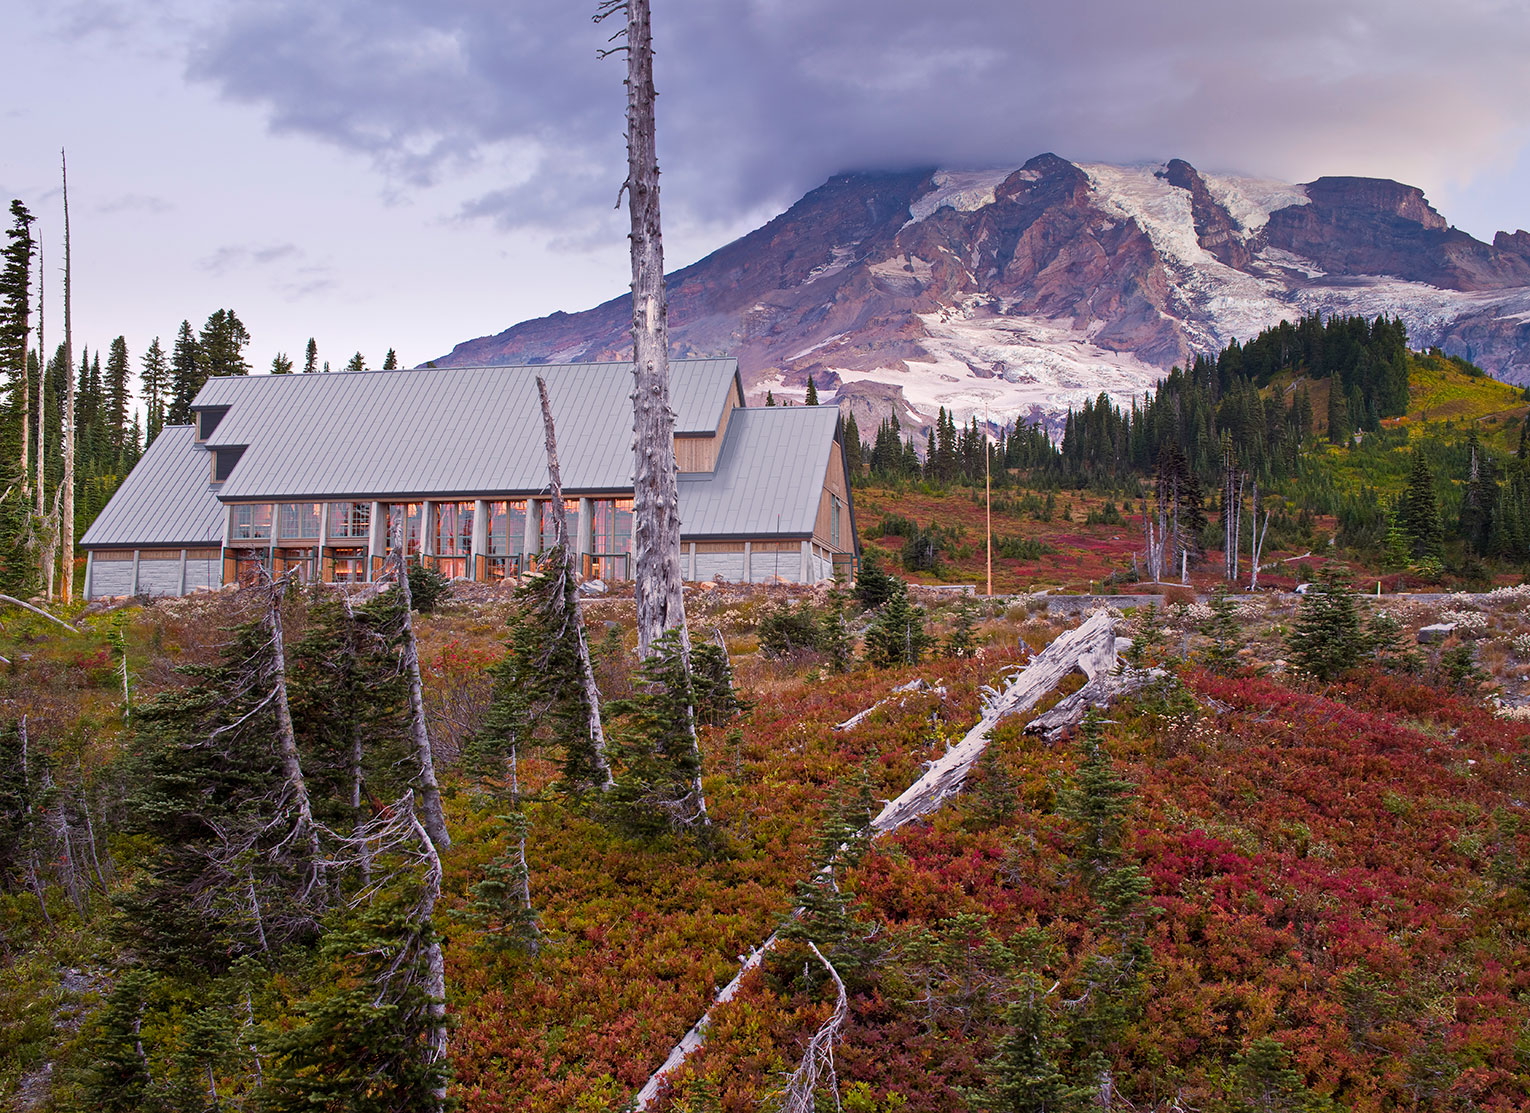 This image shows a large new visitor center with a steeply-sloped metal roof and floor-to-ceiling windows and doors which are lit from within. In the background, Mount Rainier looms large and its peak is partially covered by a large cloud. The sloping site is covered with evergreens, snags, and blanketed in red and yellow plants.